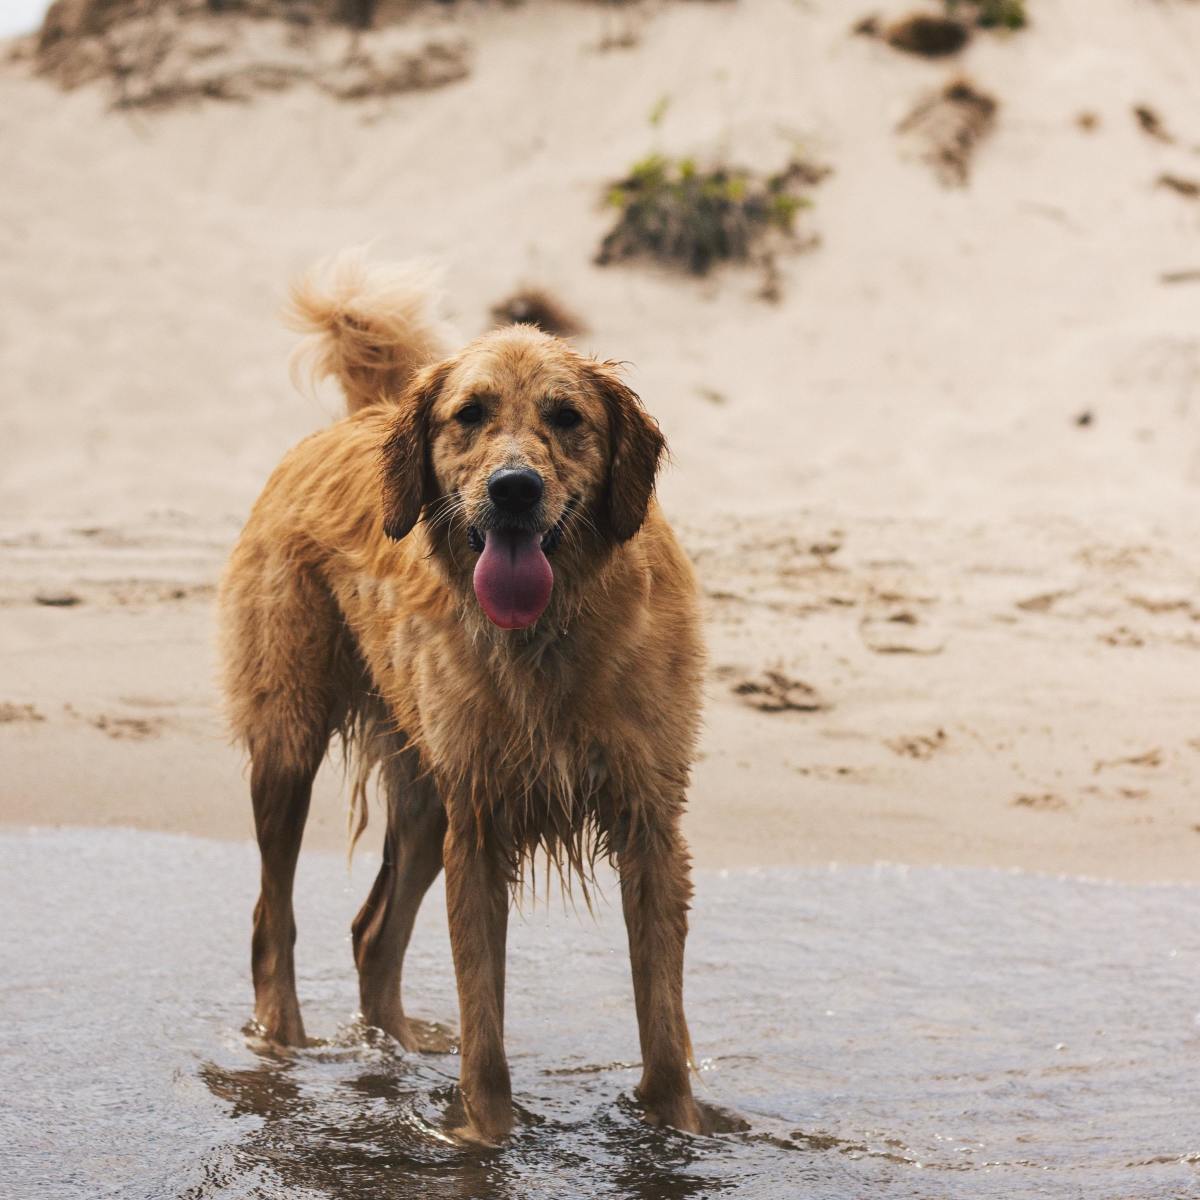 Q&A: Is It Okay to Wash My Dog With Just Water Every Day?